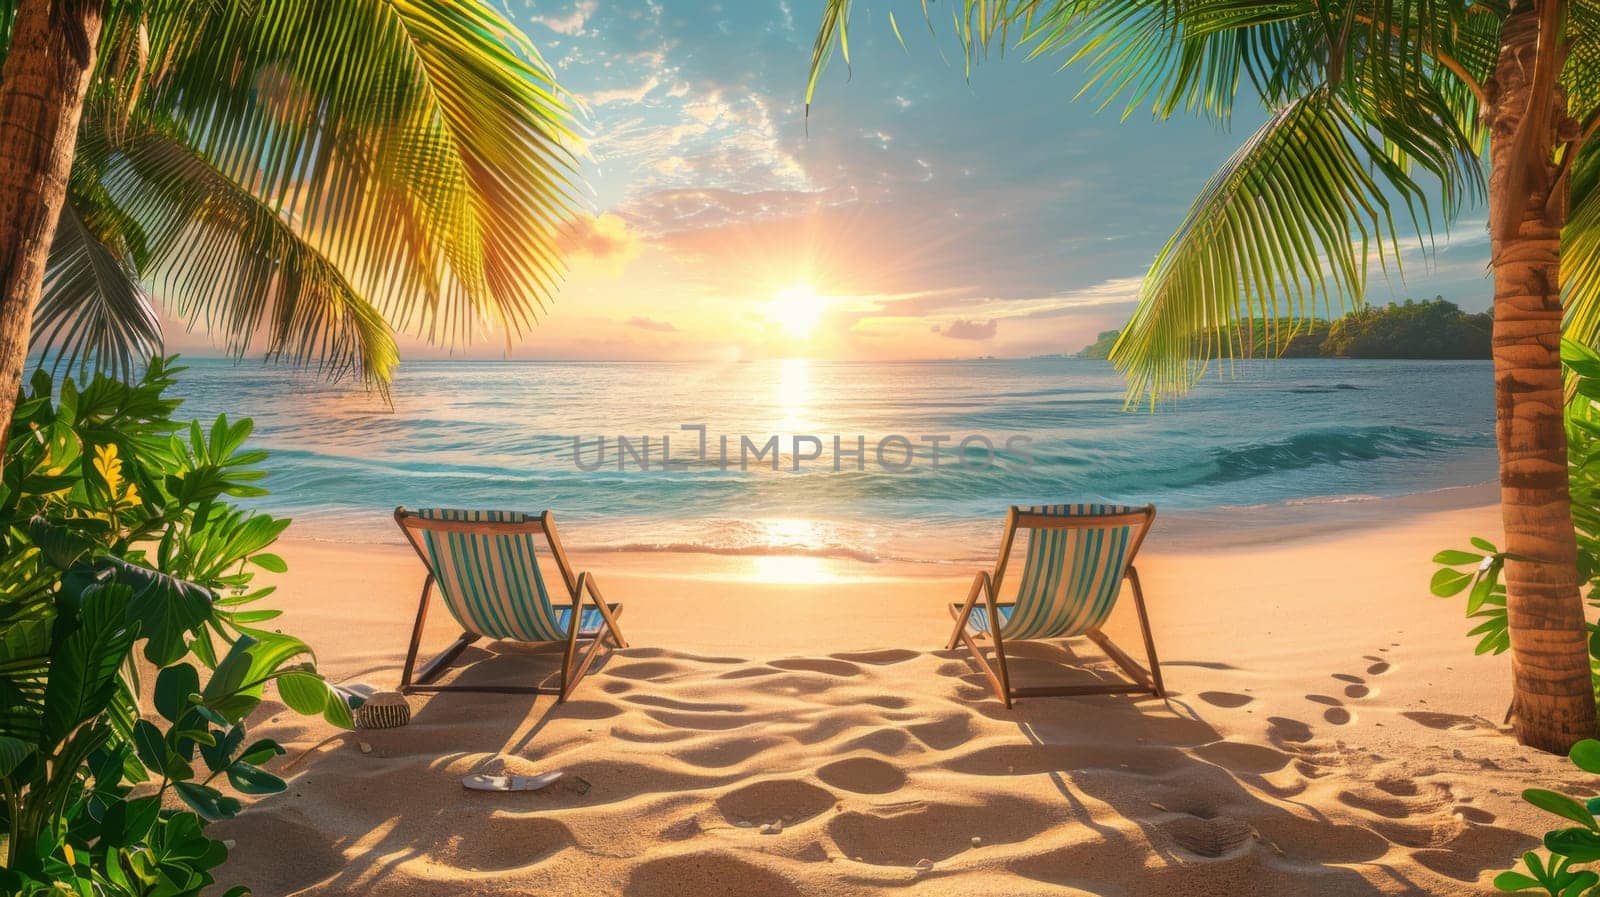 Two chairs on the beach at sunset with palm trees in background, AI by starush